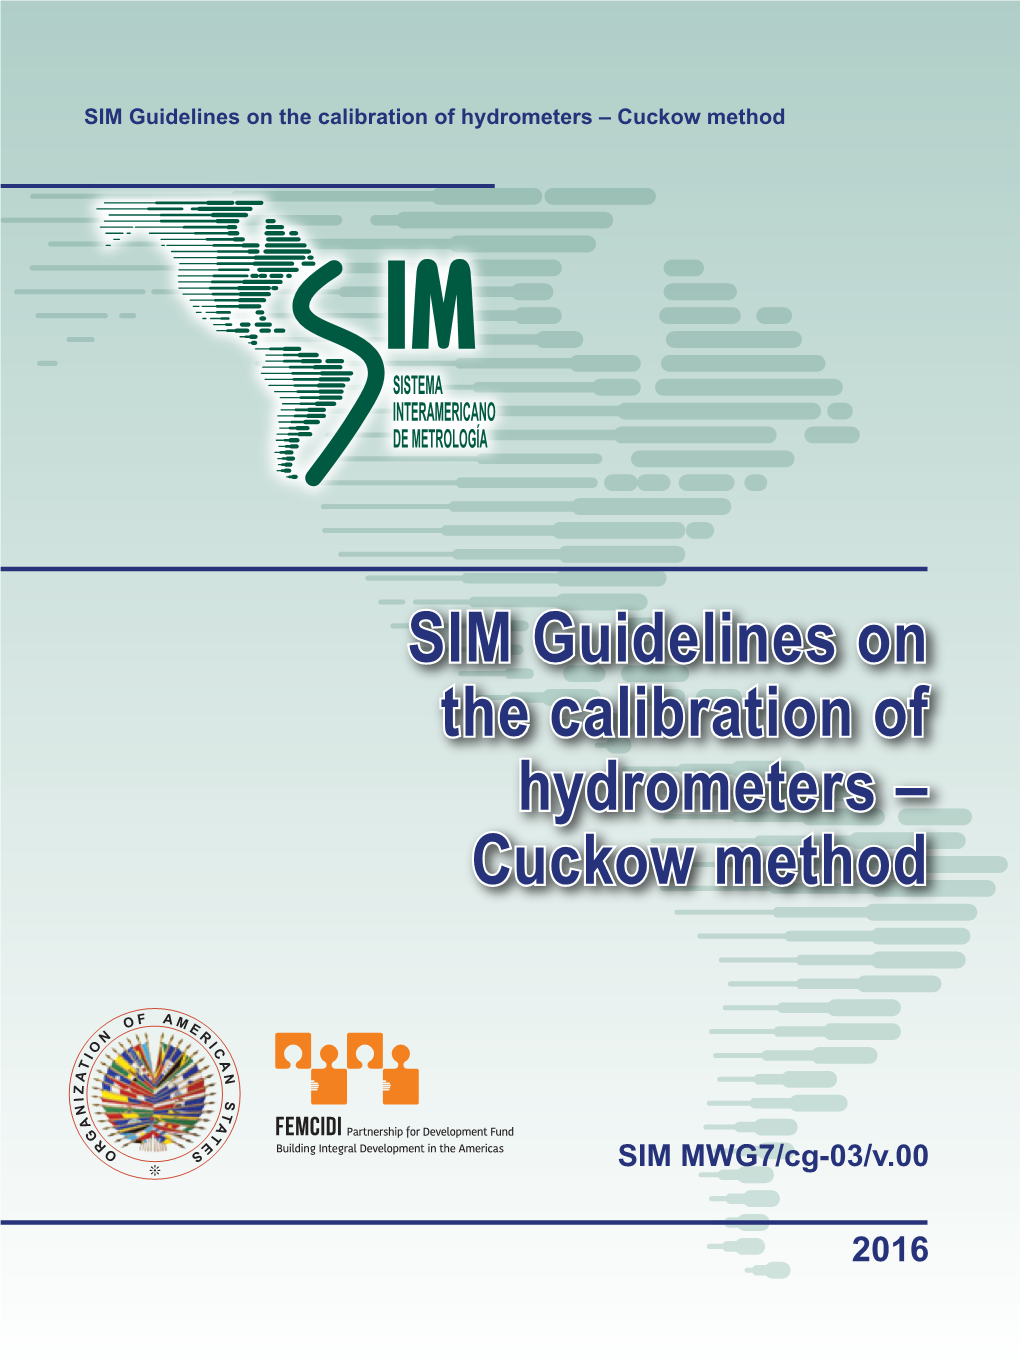 SIM Guidelines on the Calibration of Hydrometers – Cuckow Method